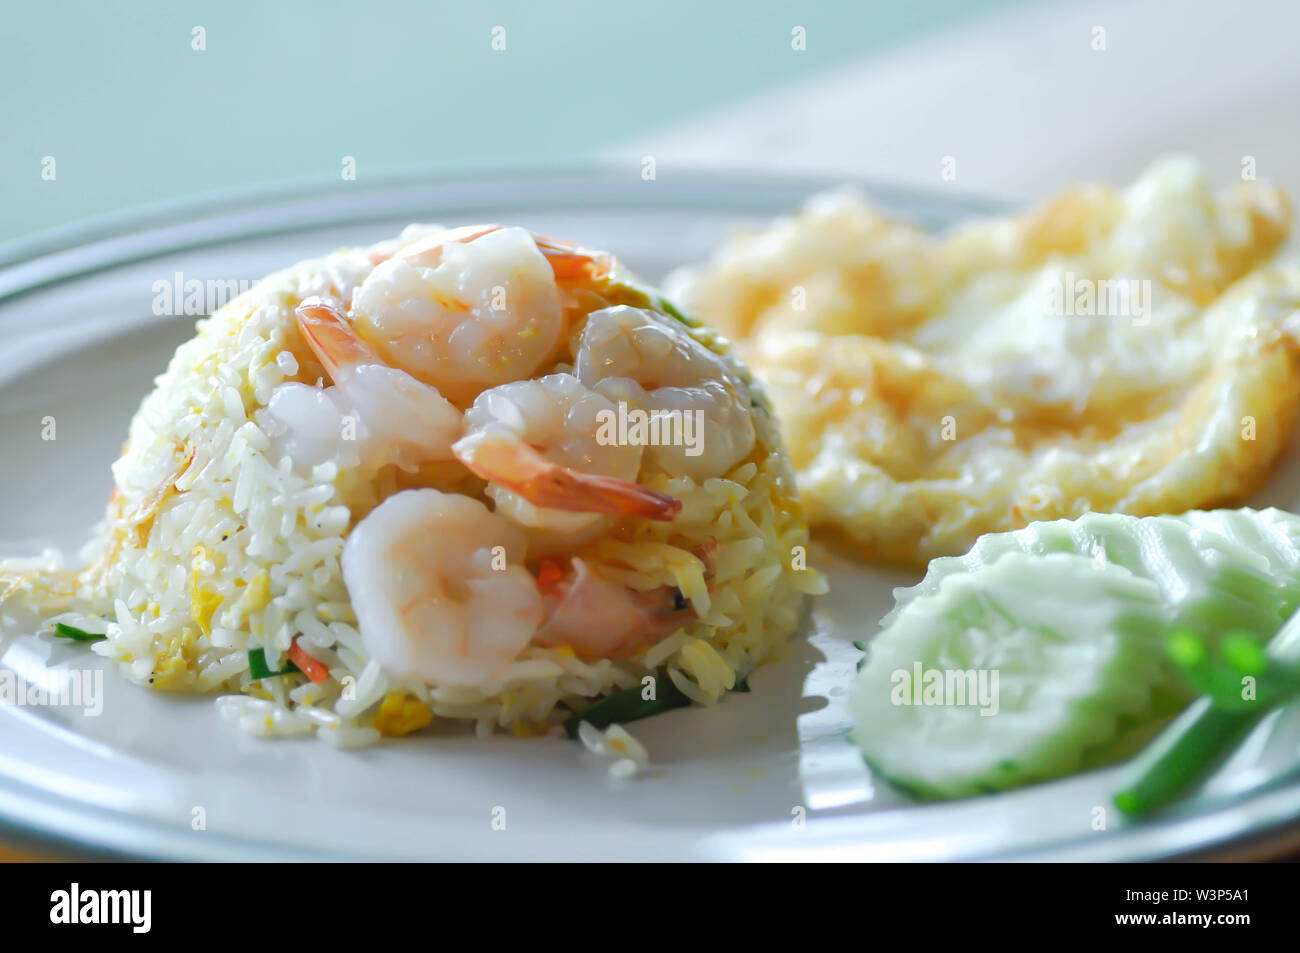 stir-fried rice with shrimp and fried egg and vegetable Stock Photo